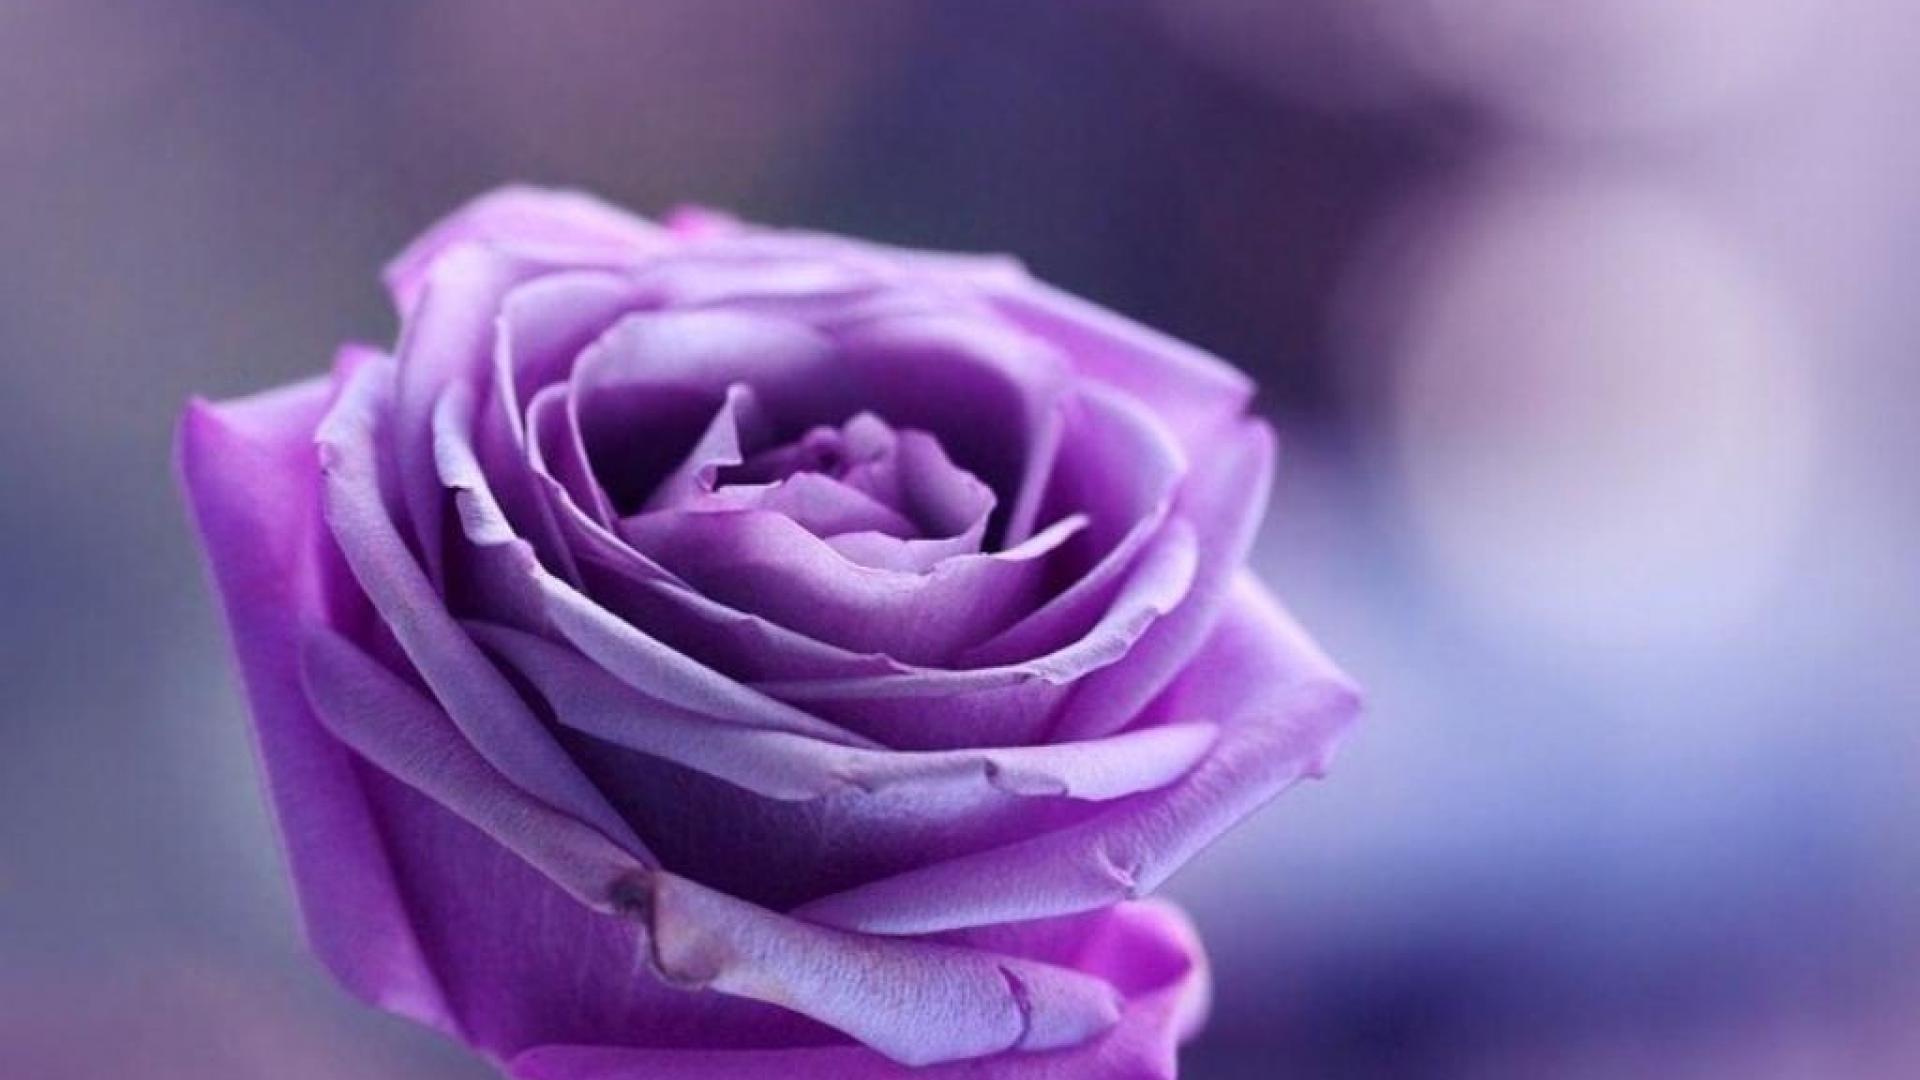 Purple Roses Background   Wallpaper High Definition High Quality 1920x1080